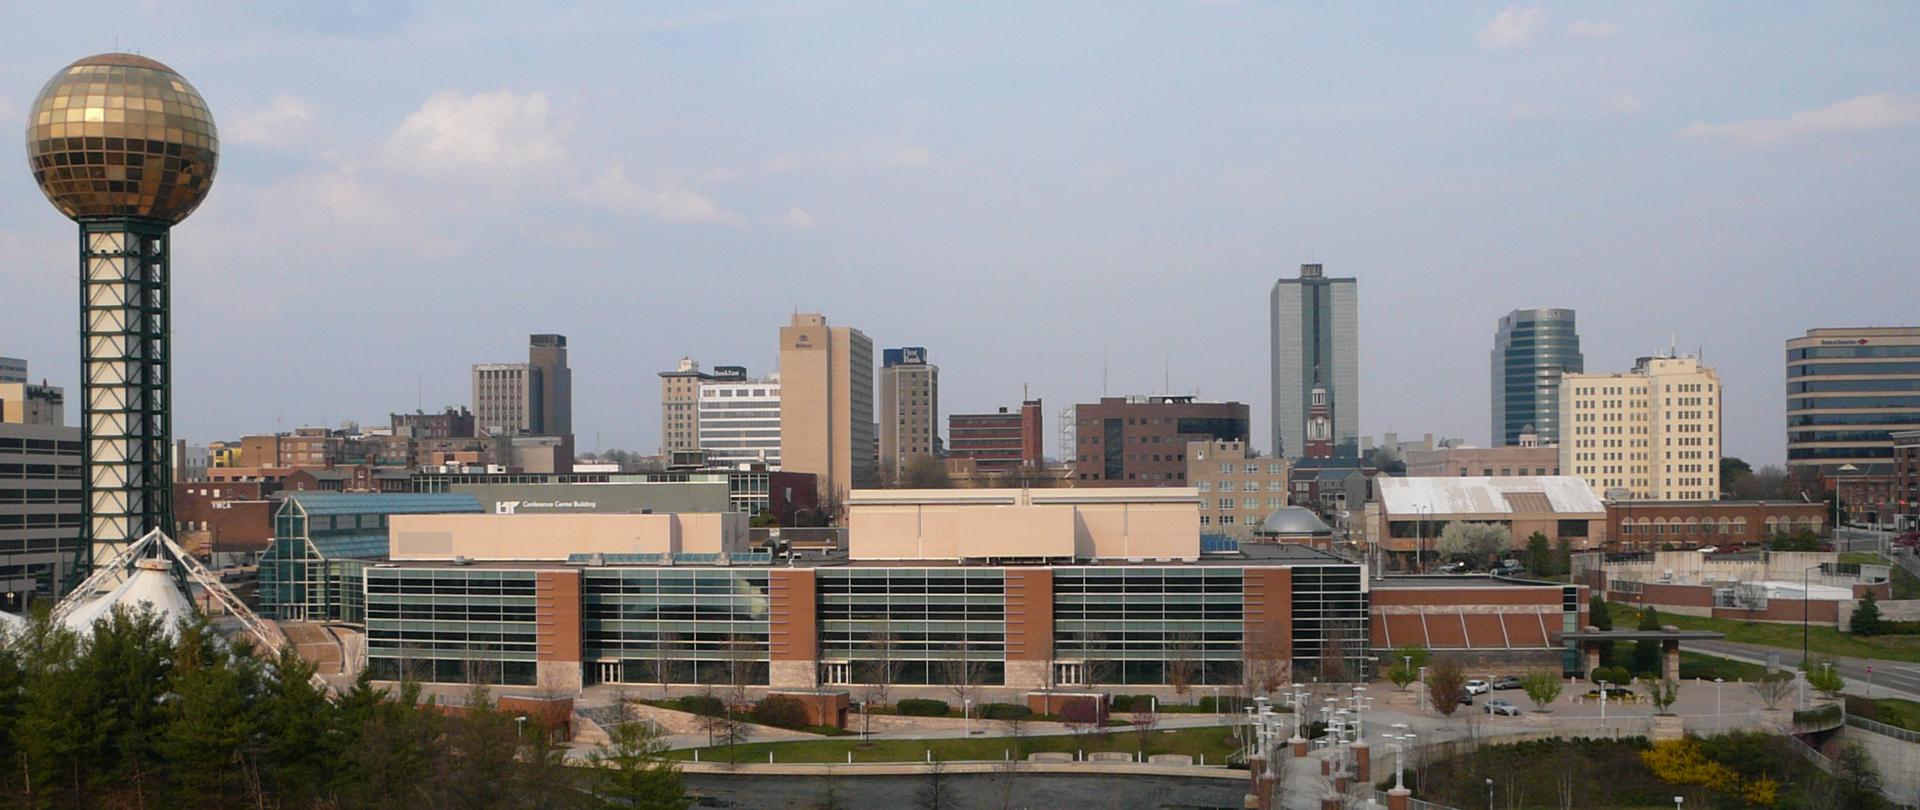 Eastward view of the skyline of downtown Knoxville, Tennessee